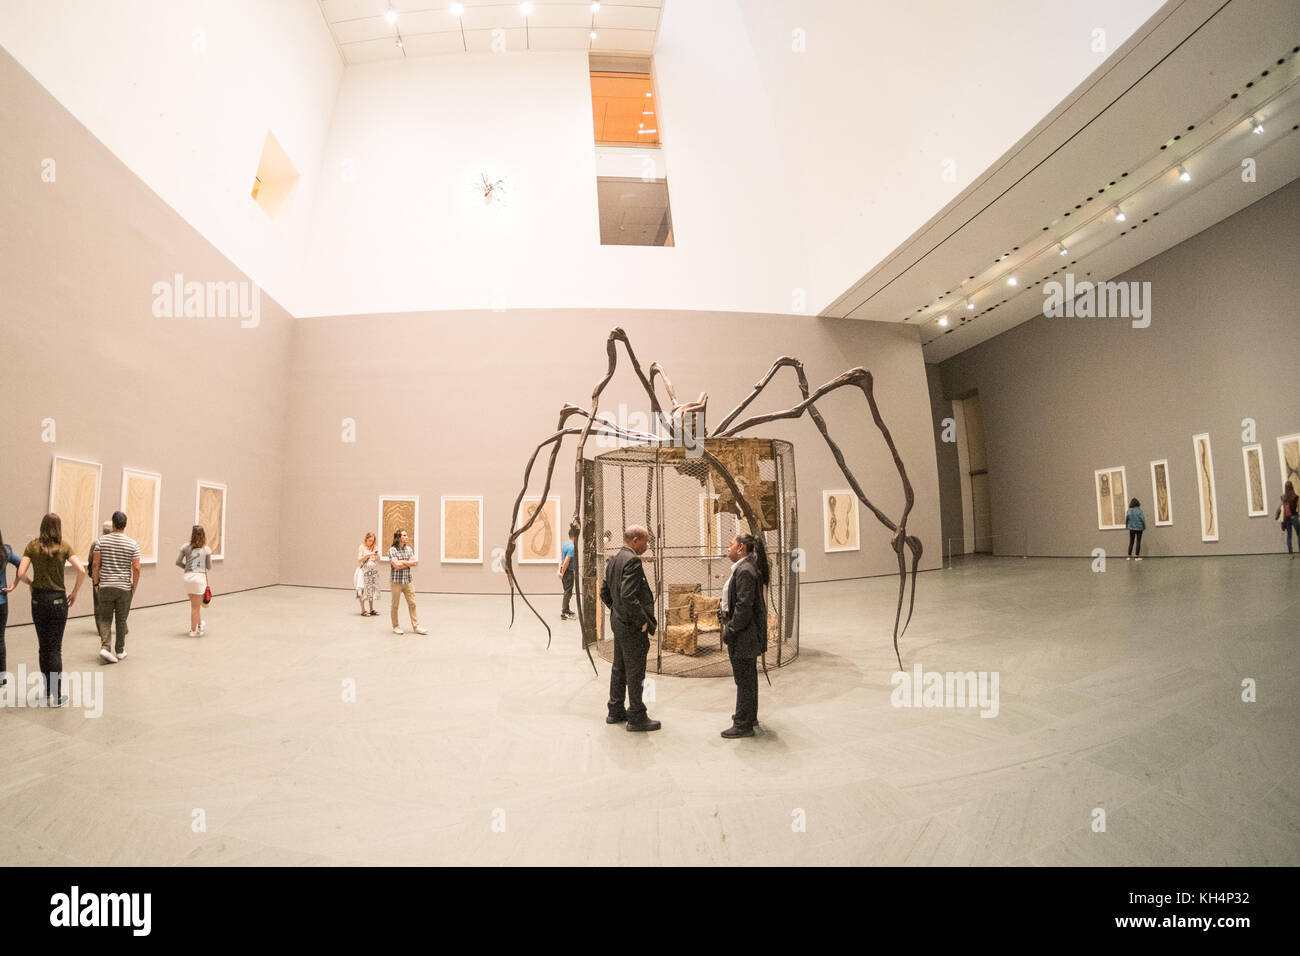 Louise Bourgeois, An Unfolding portrait exhibition at MoMa, The Stock Photo  - Alamy